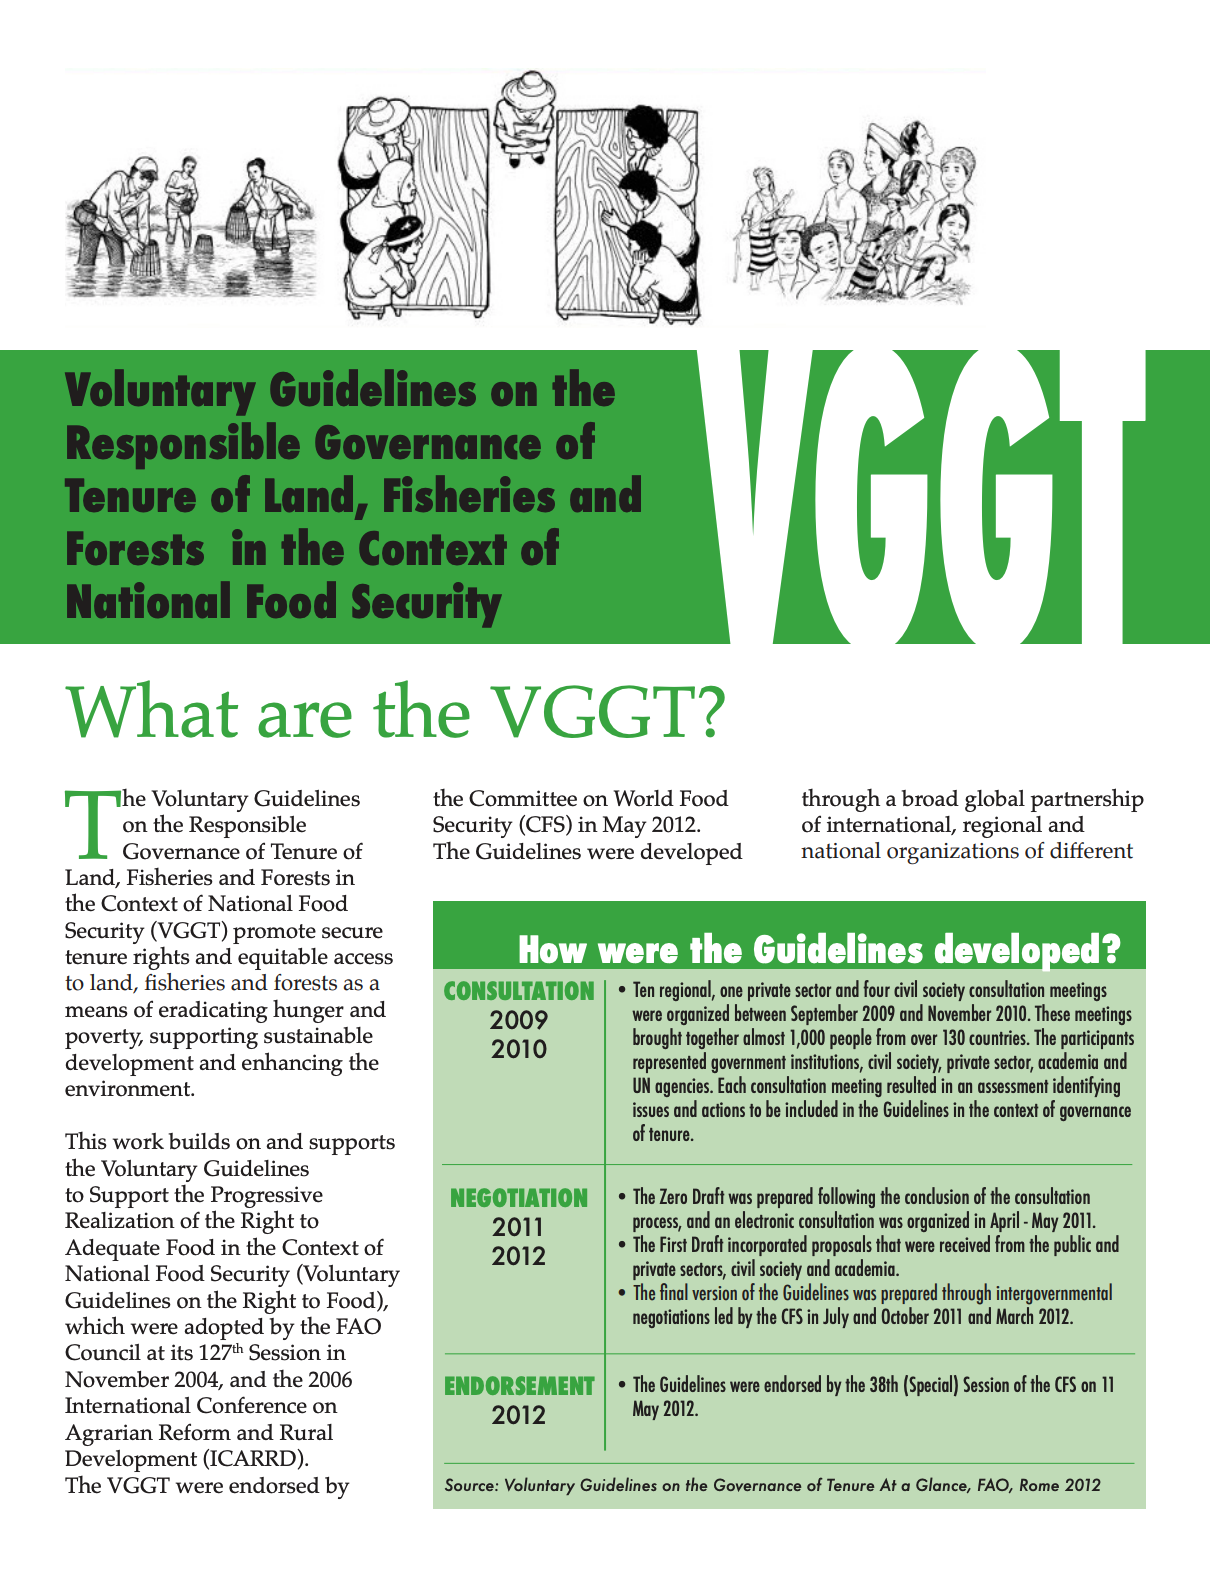 ANGOC: Voluntary Guidelines on the Responsible Governance of Tenure of Land, Fisheries and Forests in the Context of National Food Security cover image